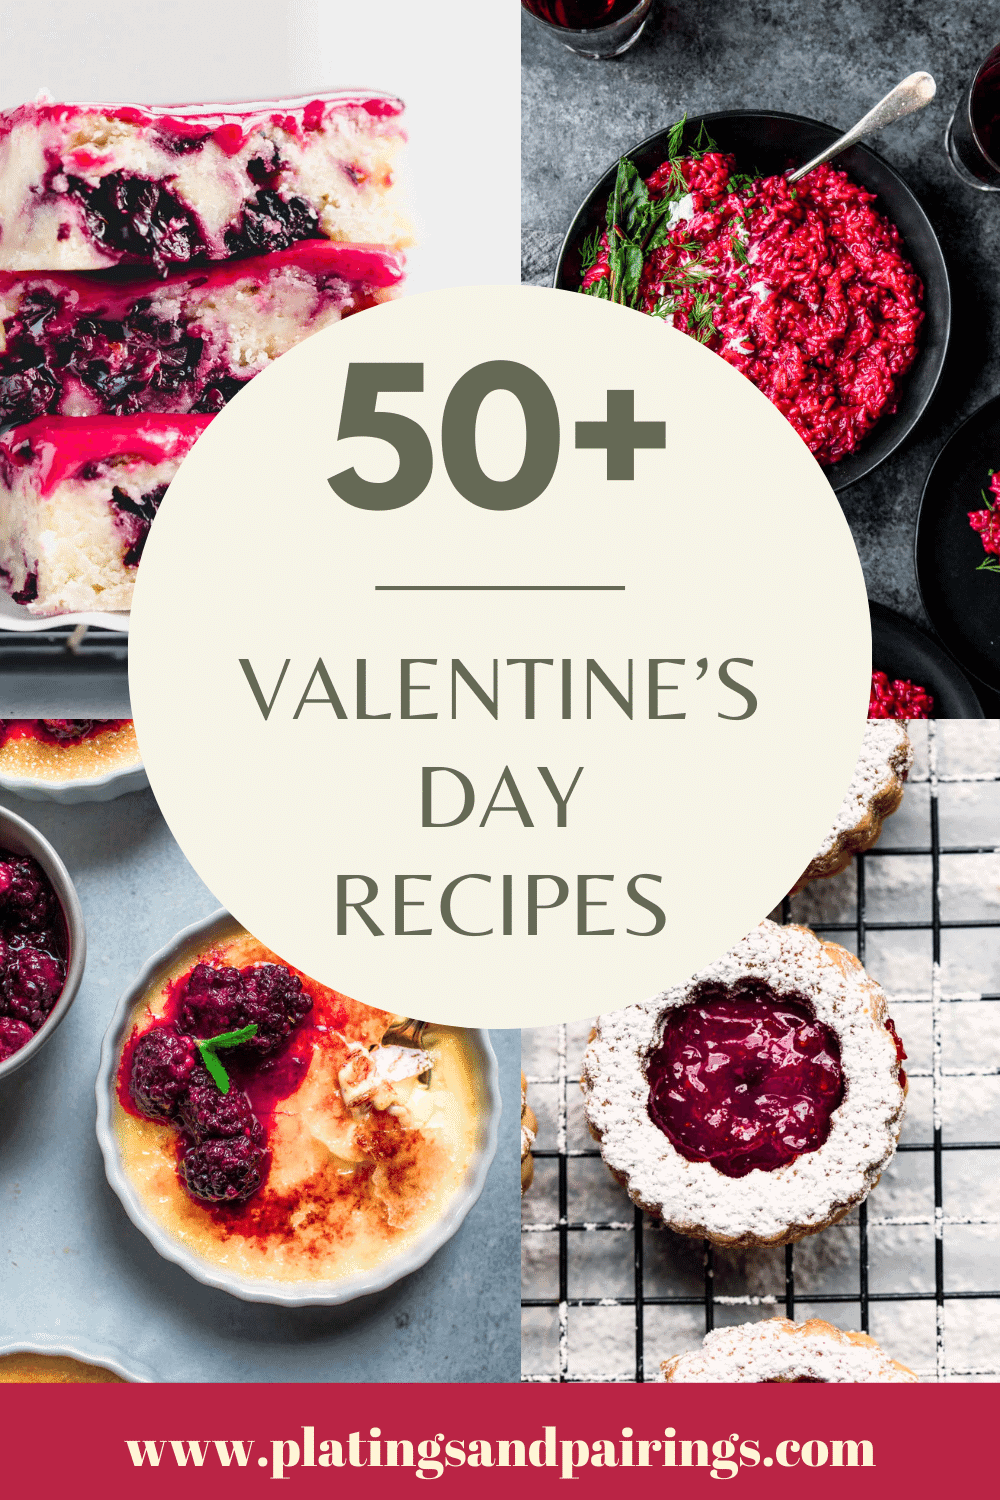 Collage of Valentine's Day recipes with text overlay.